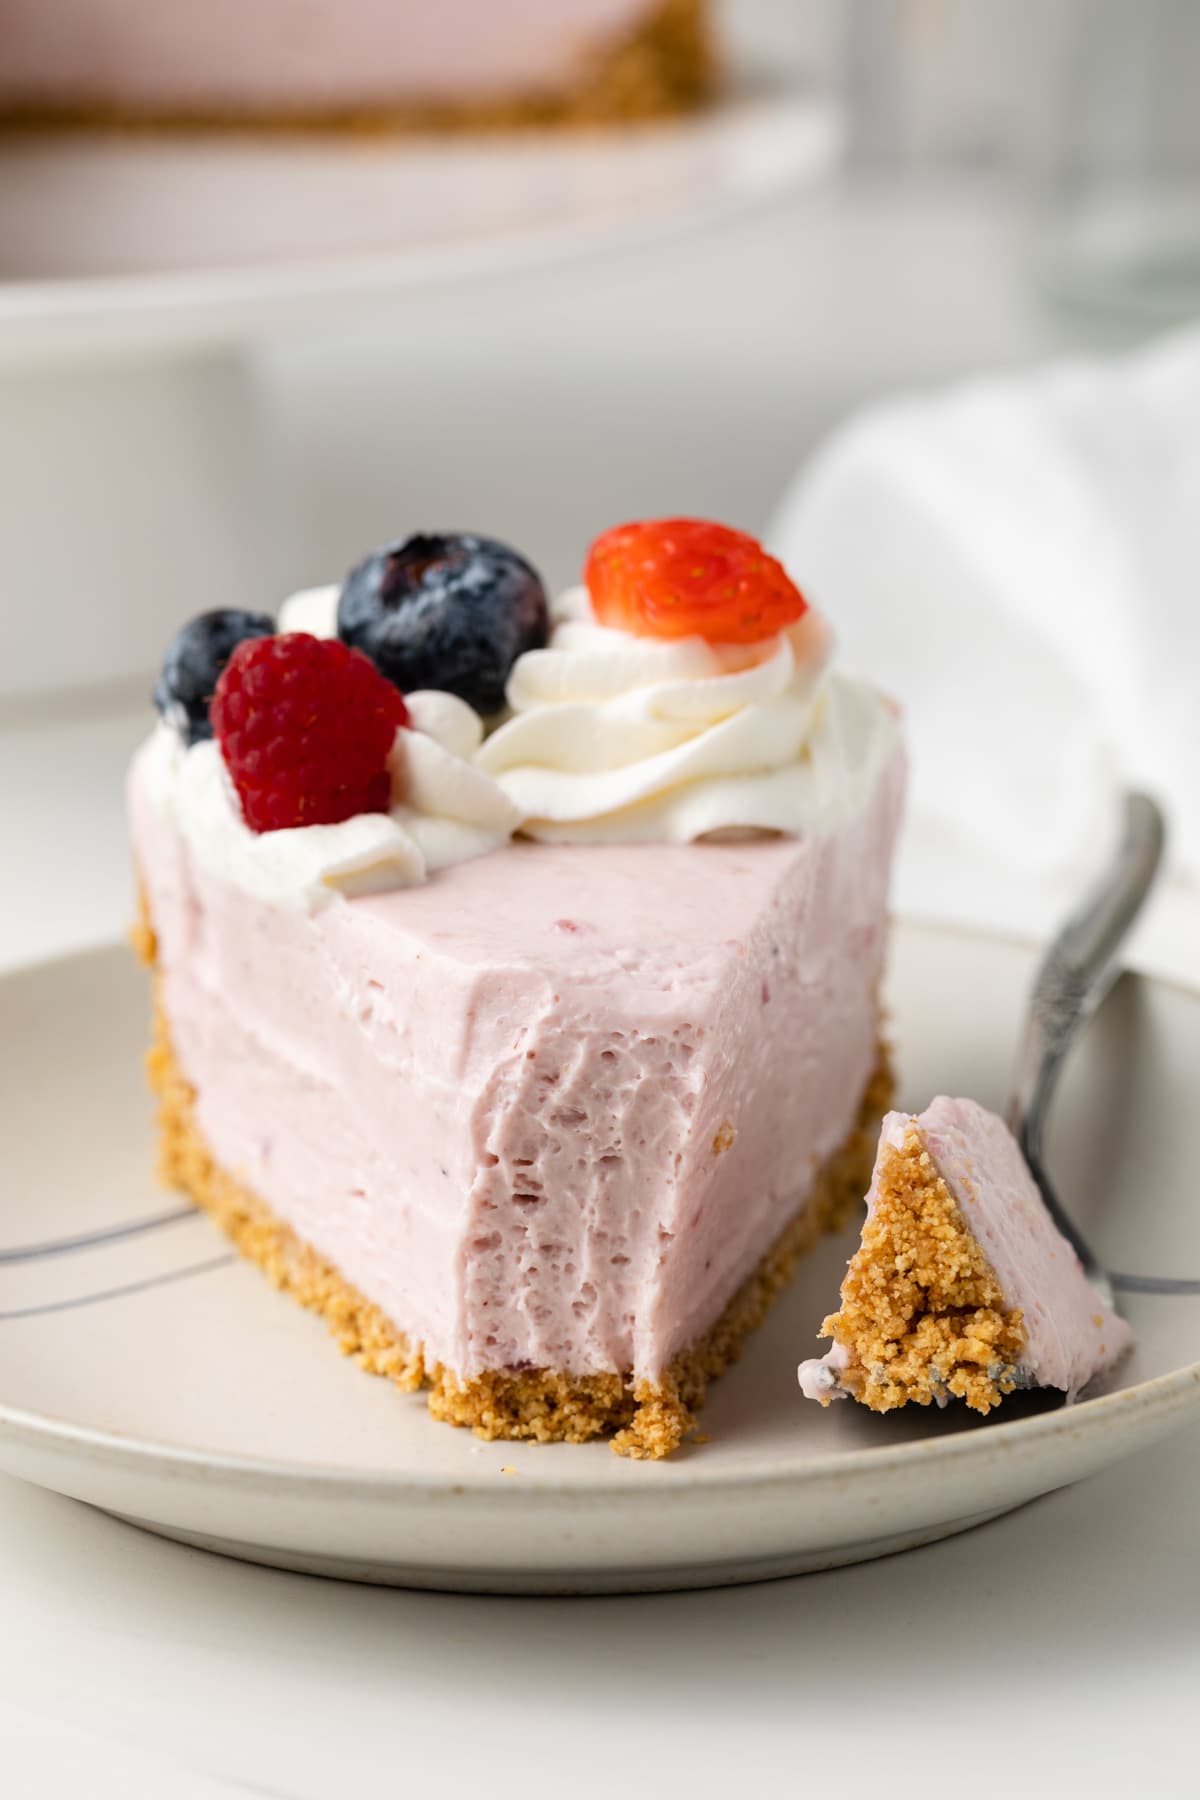 Slice of no bake berry cheesecake with a fork bite taken out.